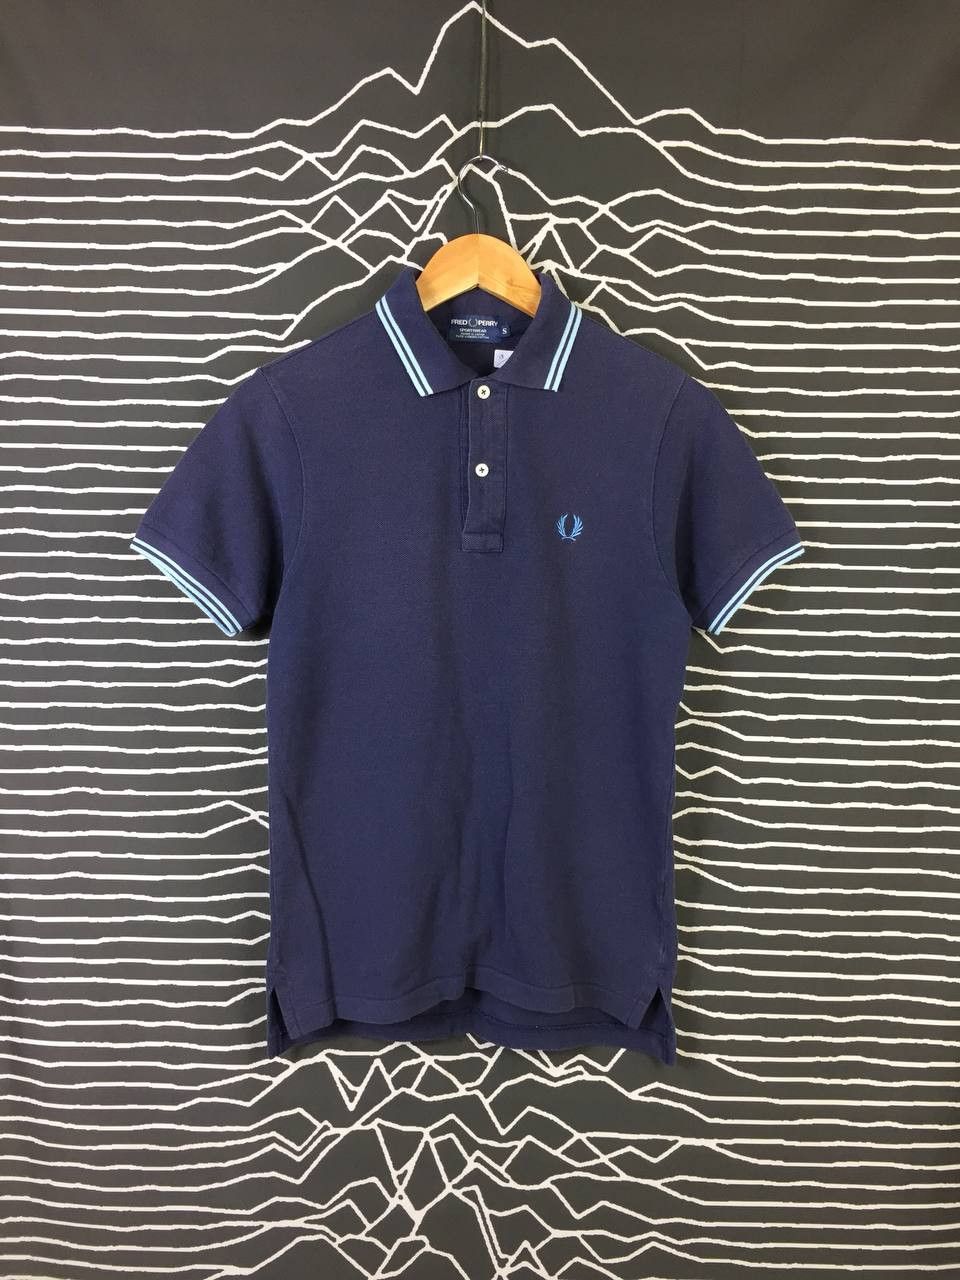 Vintage Vtg Fred Perry Sportswear Twin Tipped Polo Tee Size US S / EU 44-46 / 1 - 1 Preview